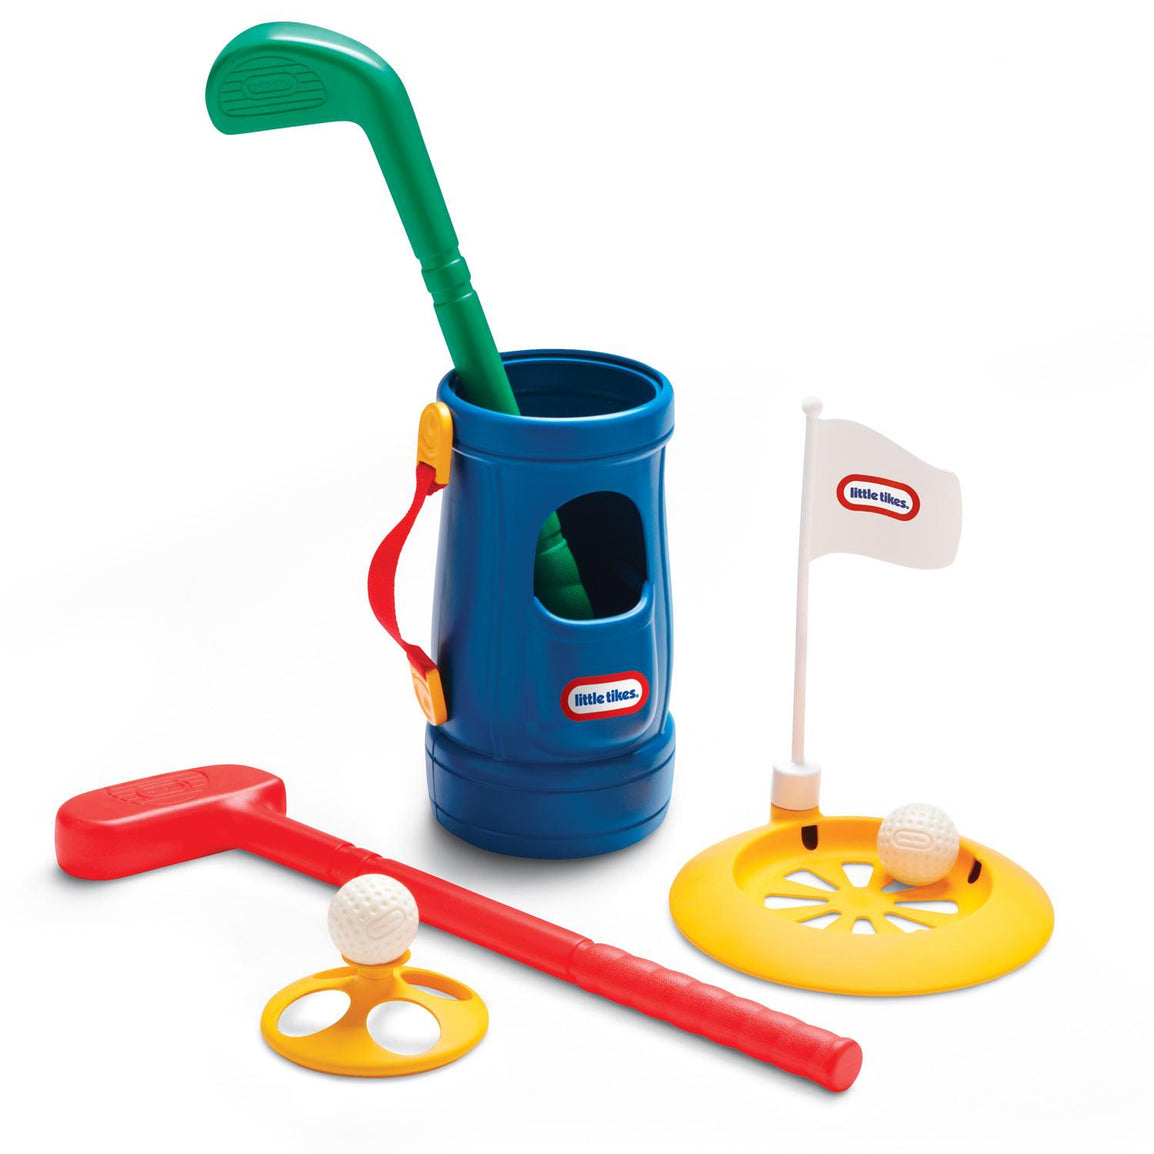 Golf toys promote active play and coordination